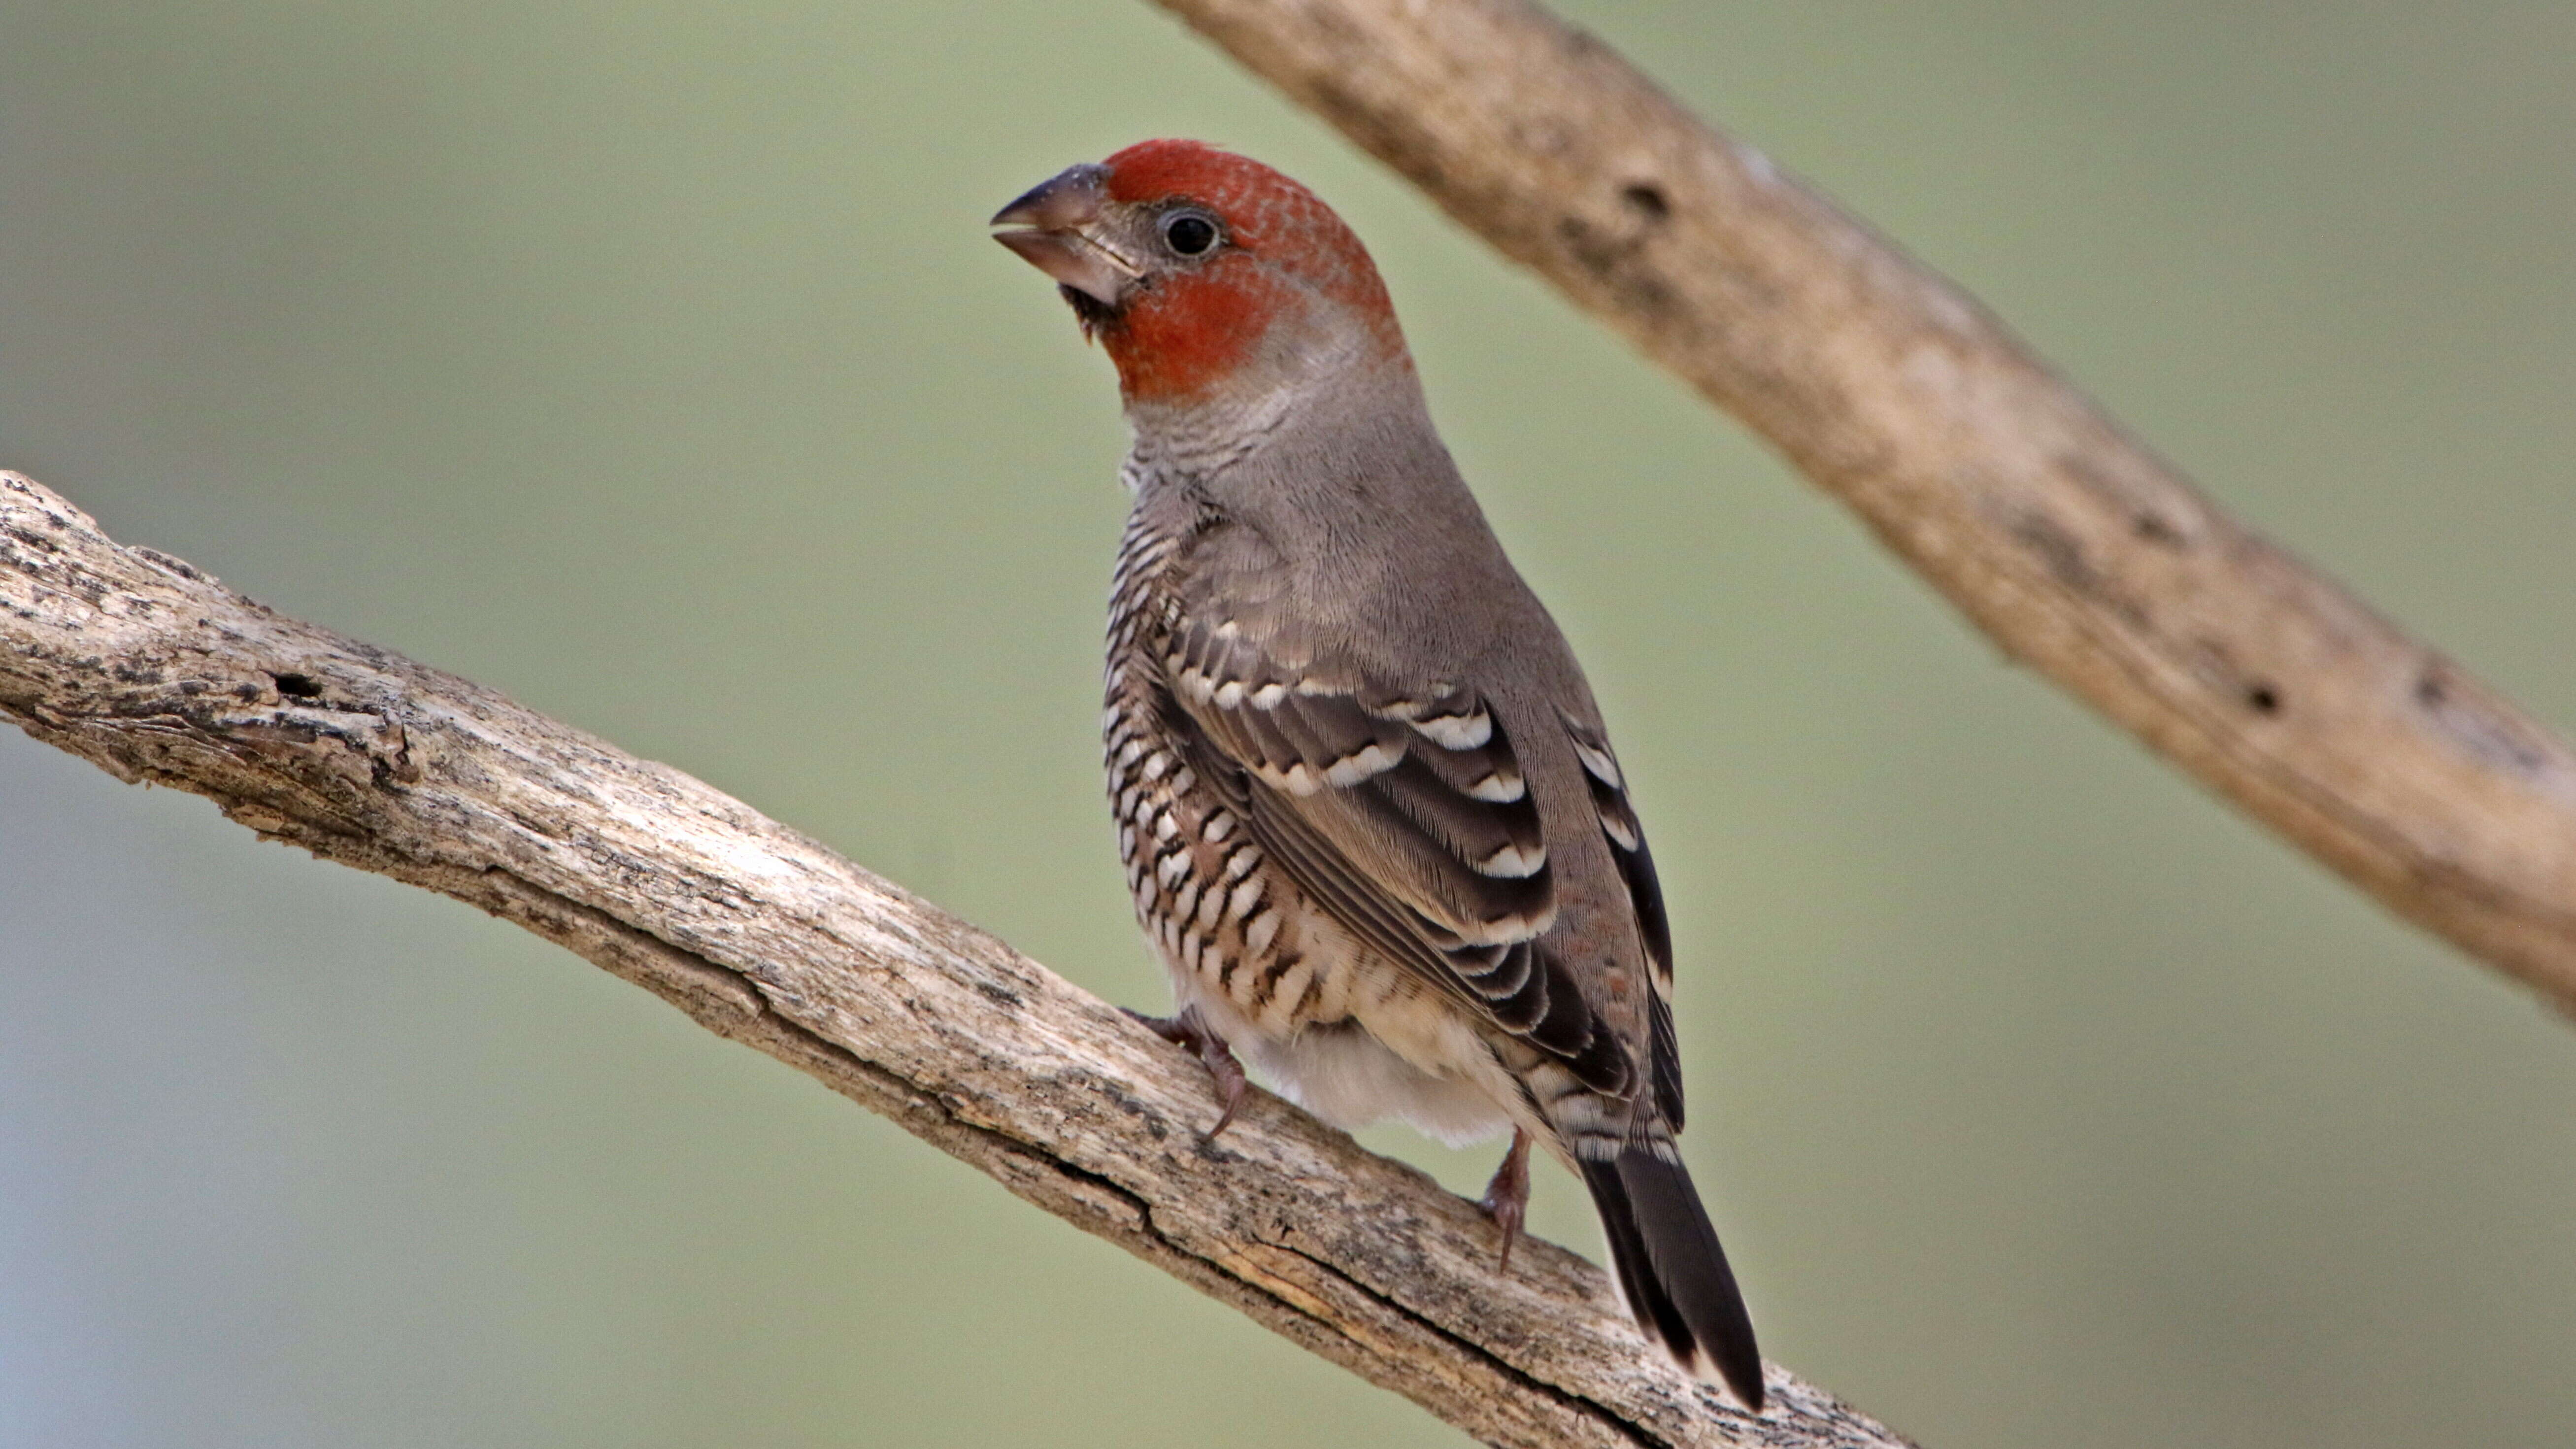 Image of Red-headed Finch